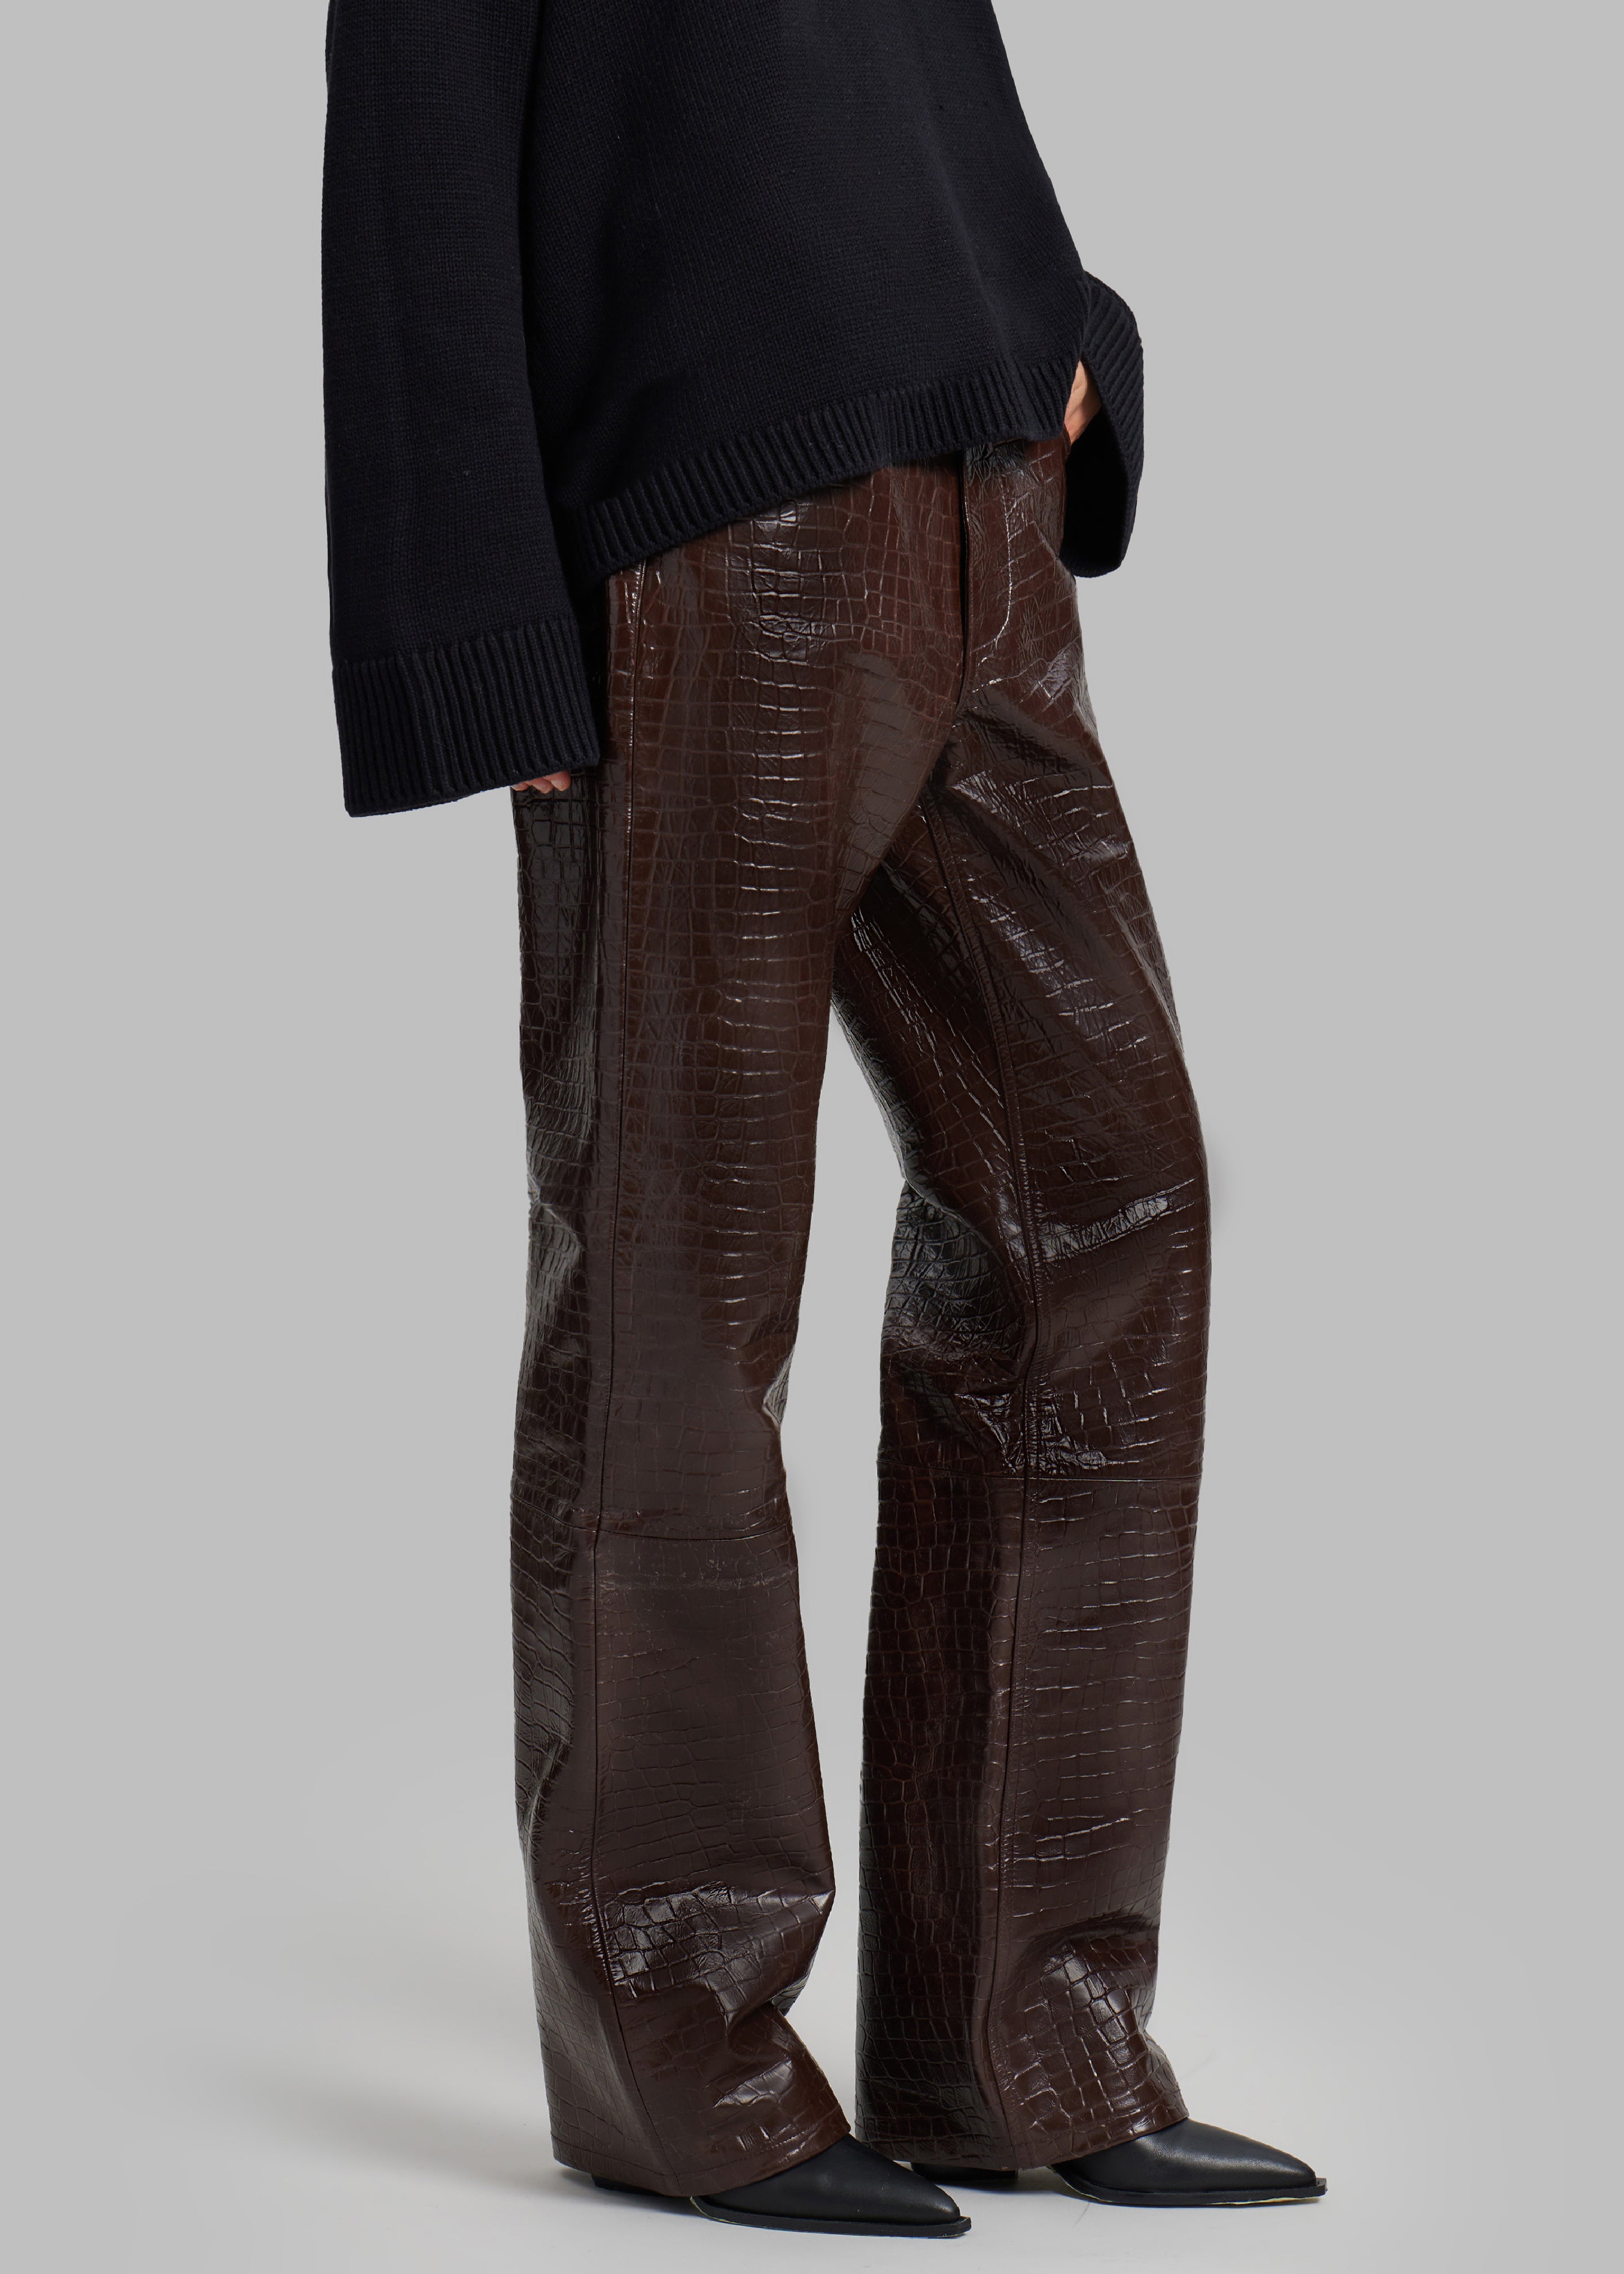 Roberto Cavalli Croc-embossed Leather Trousers in Red | Lyst